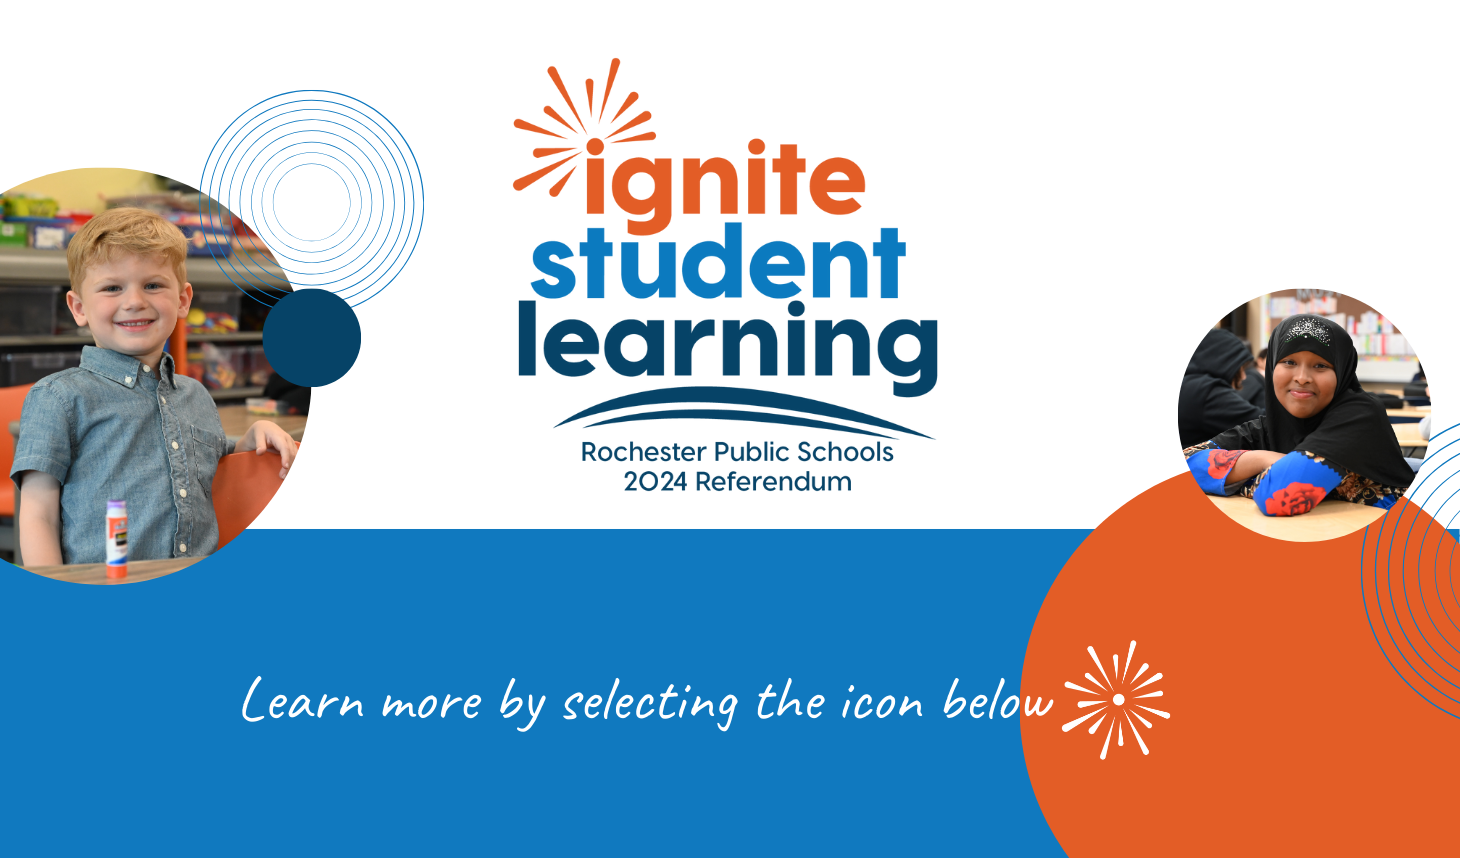 ignite student learning: Rochester Public Schools 2024 Referendum learn more by selecting the icon below